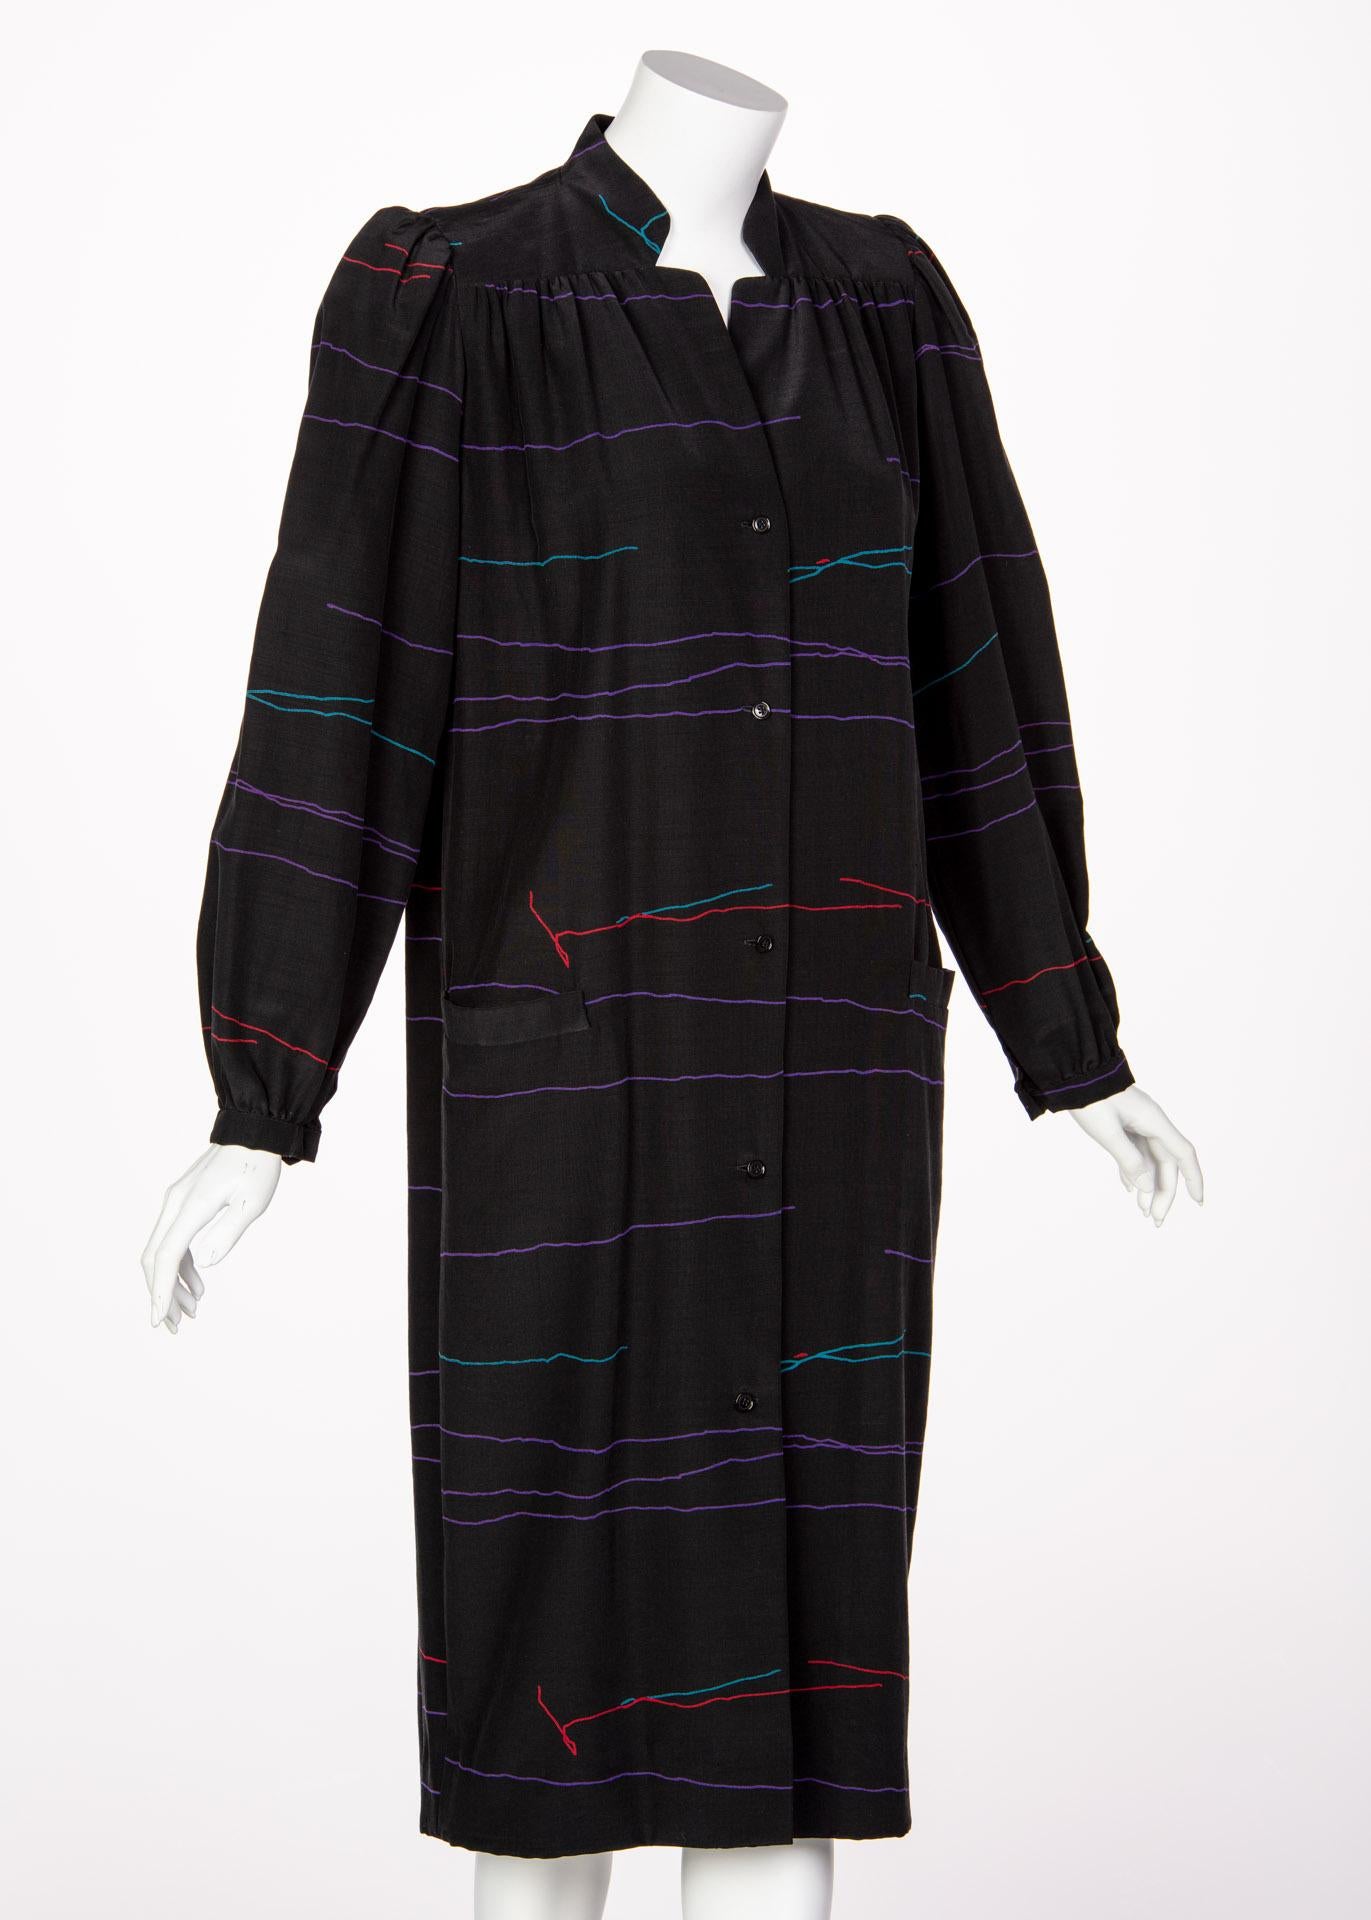 Vintage Halston Black Abstract Striped Silk Dress Coat, 1970s For Sale 1